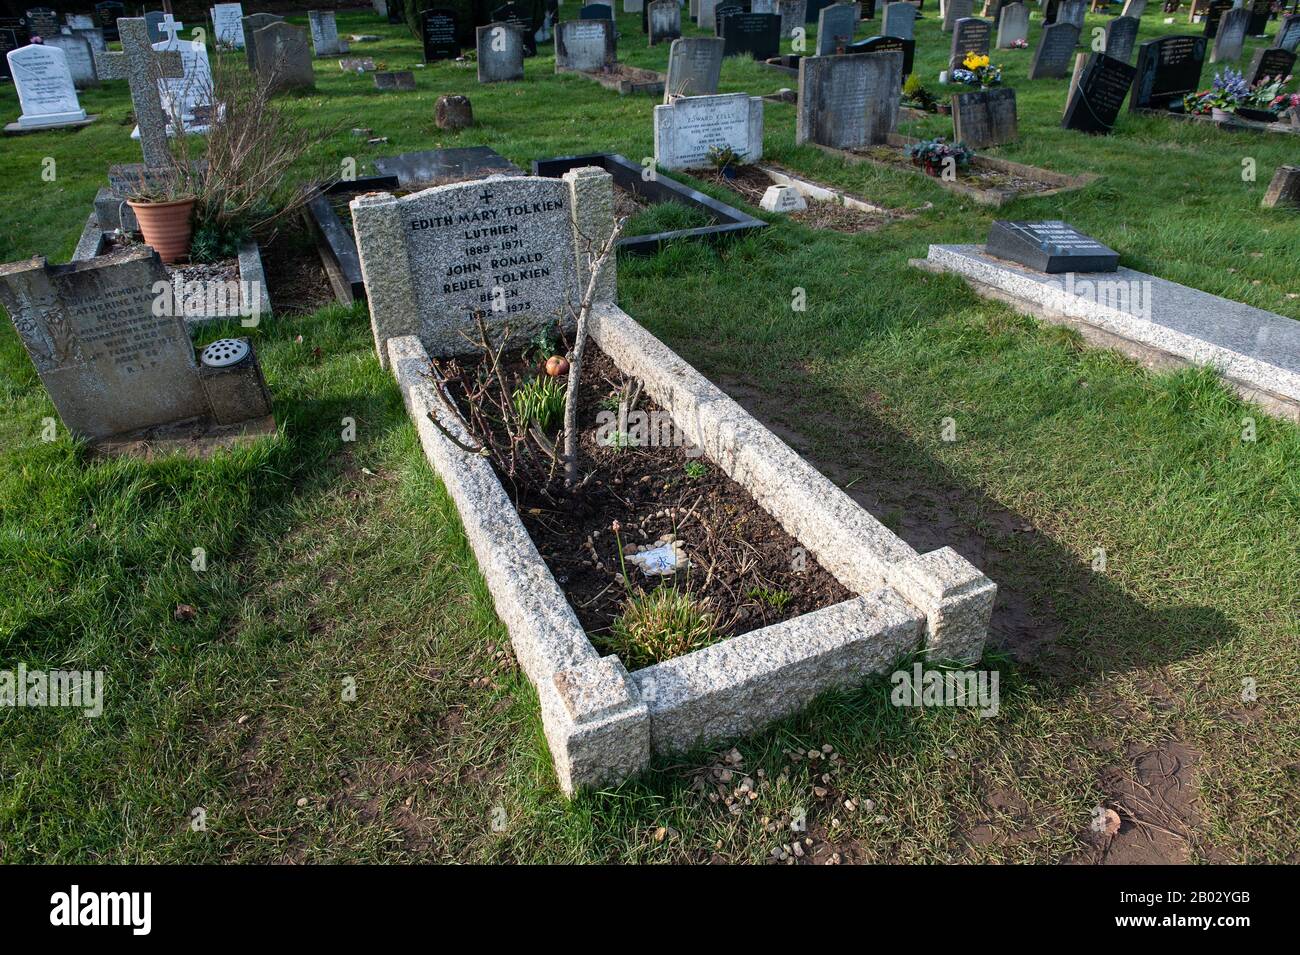 Oxford, England, UK. February 7th 2020  The final resting place of John Ronald Reuel Tolkien (1892–1973) and Edith Mary Tolkien (1889-1971) Stock Photo